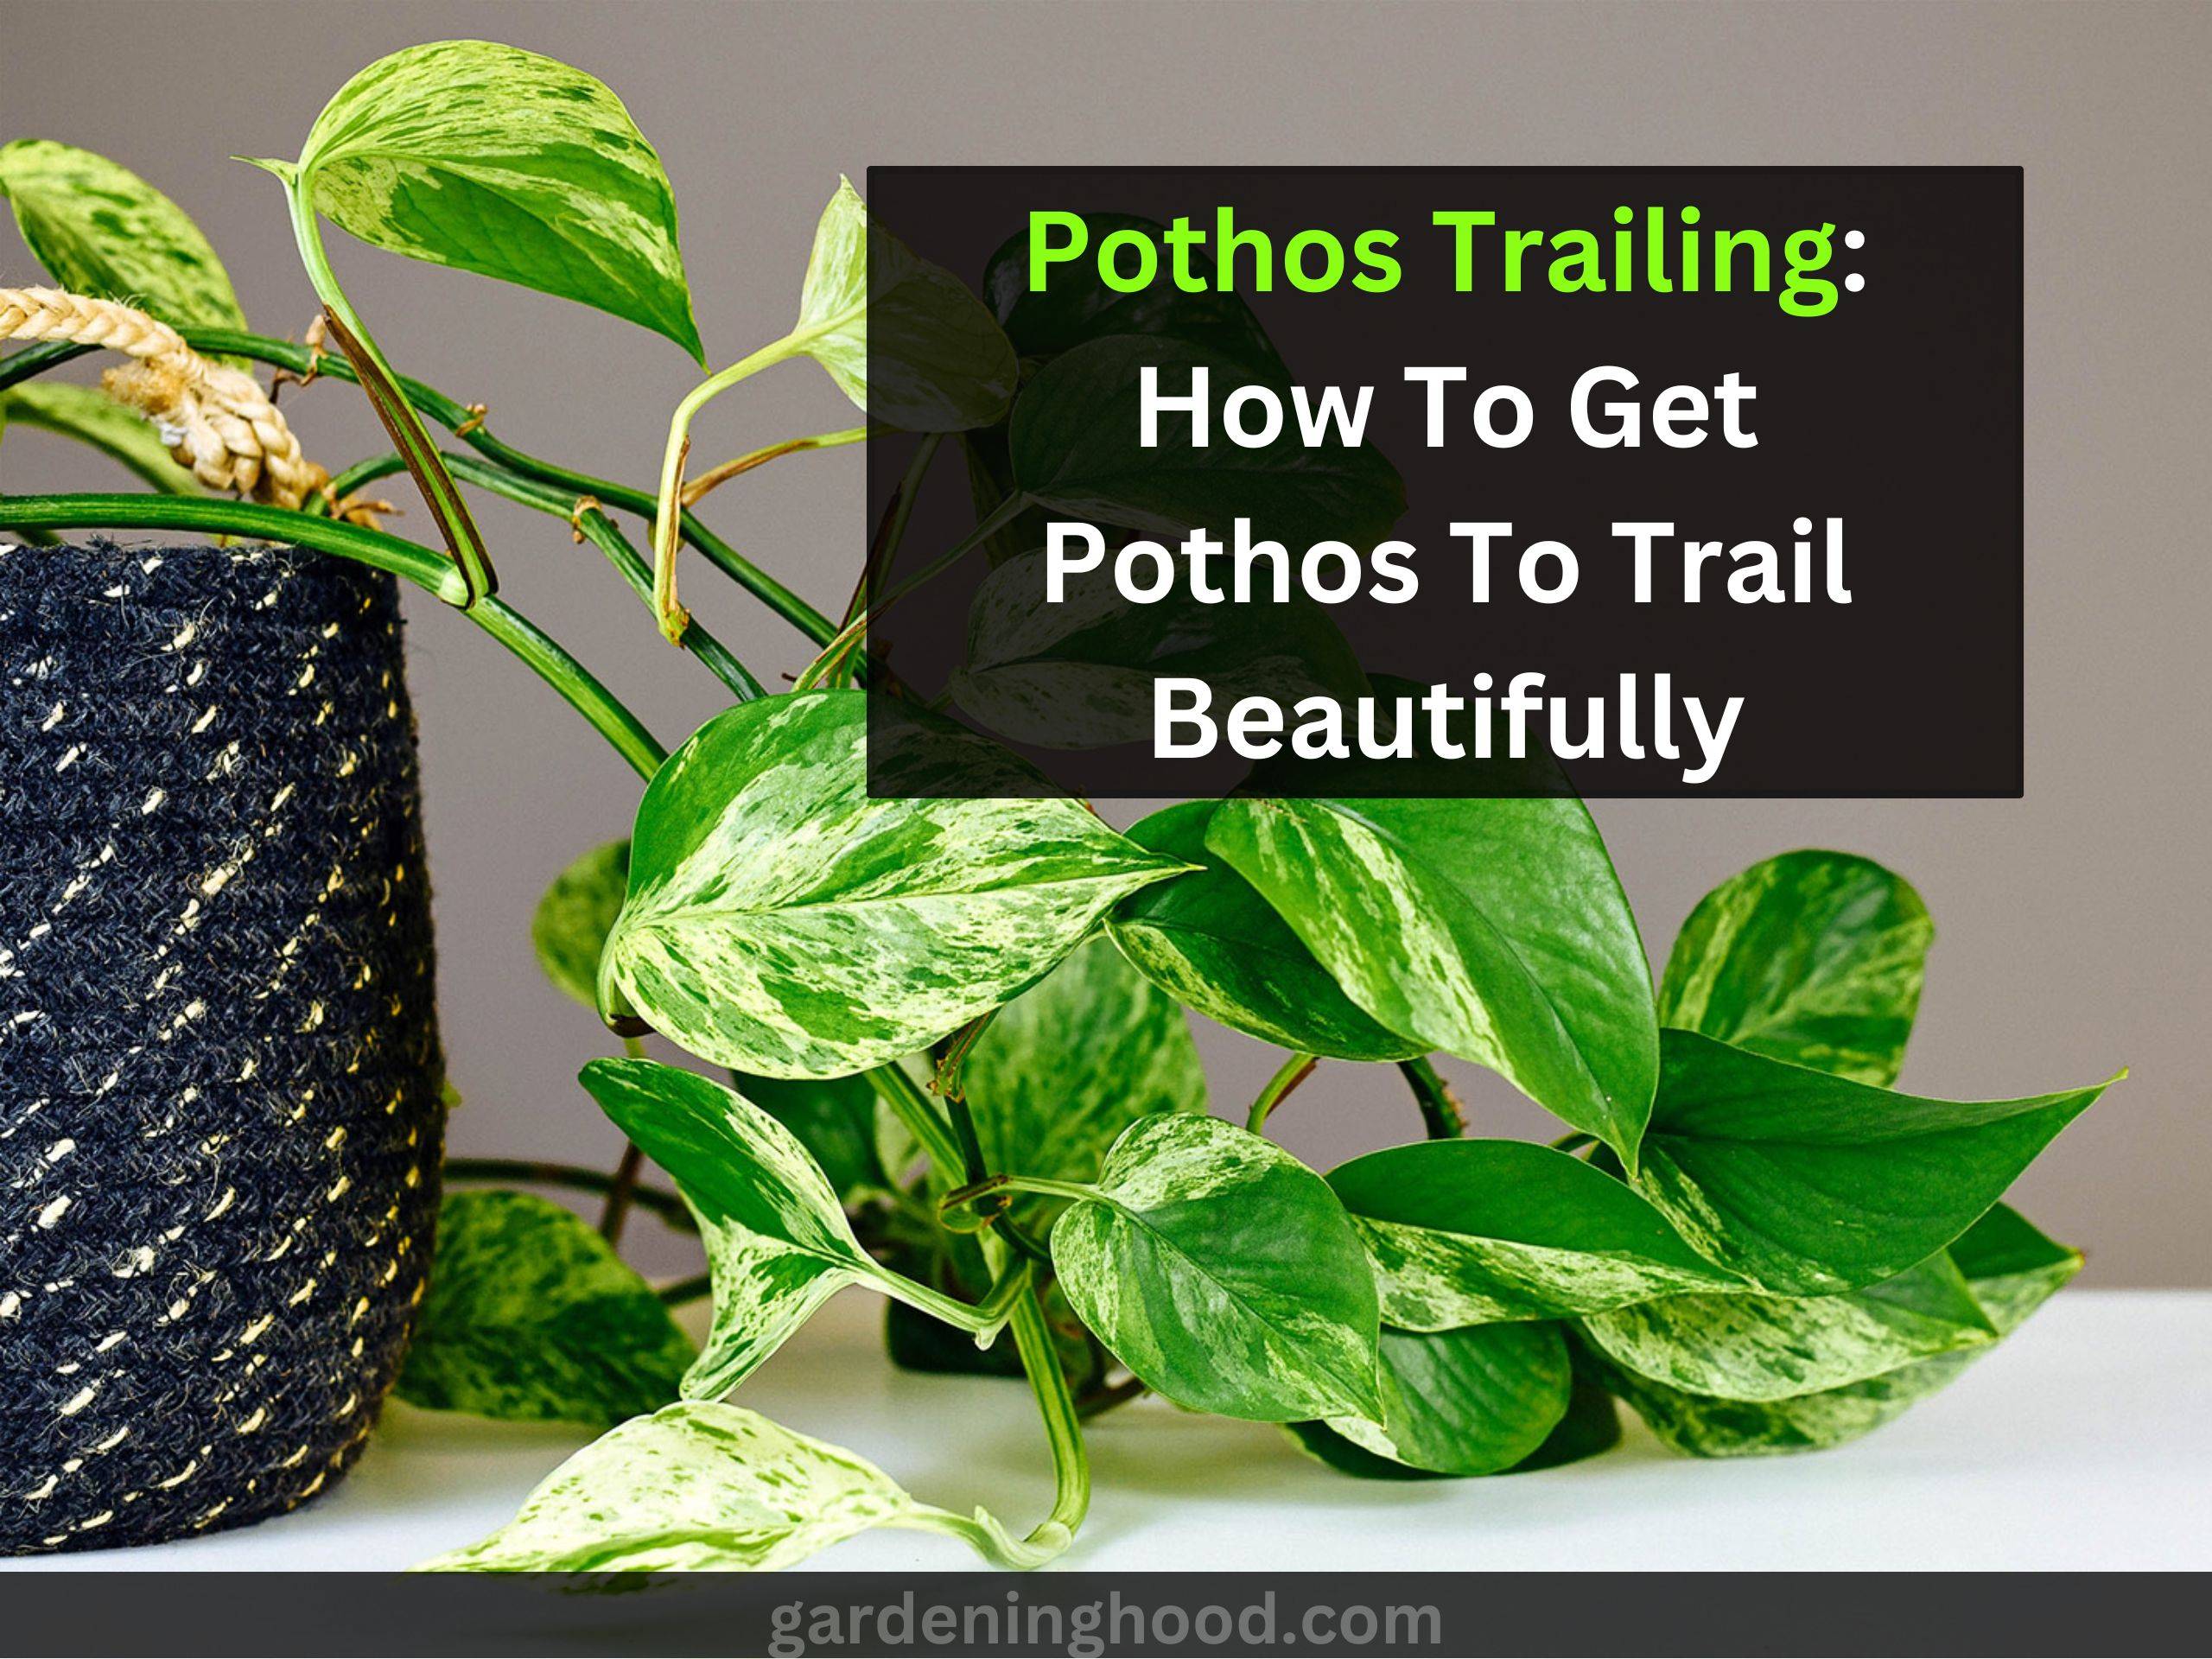 Pothos Trailing: How To Get Pothos To Trail Beautifully